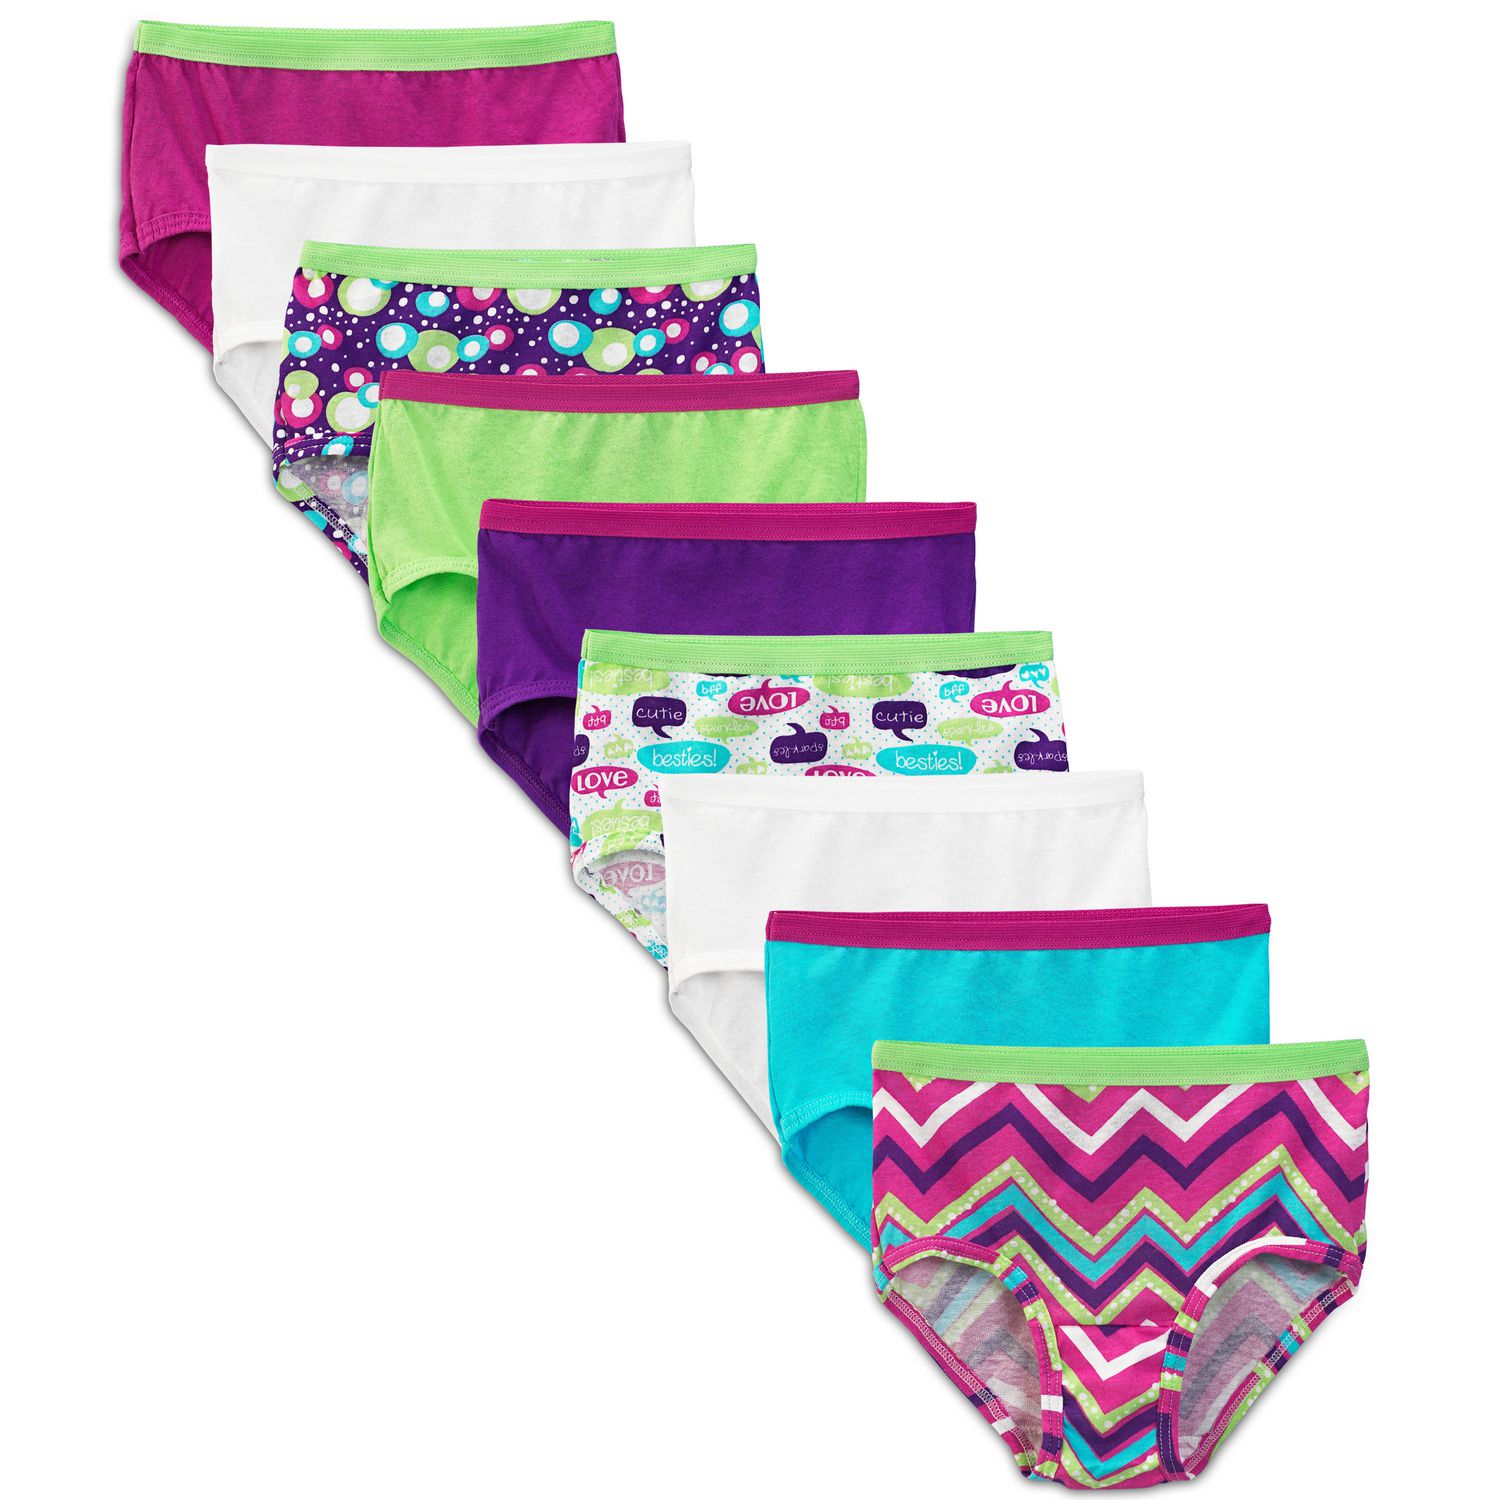 Fruit of the Loom Girls Cotton Brief, 9 Pack 